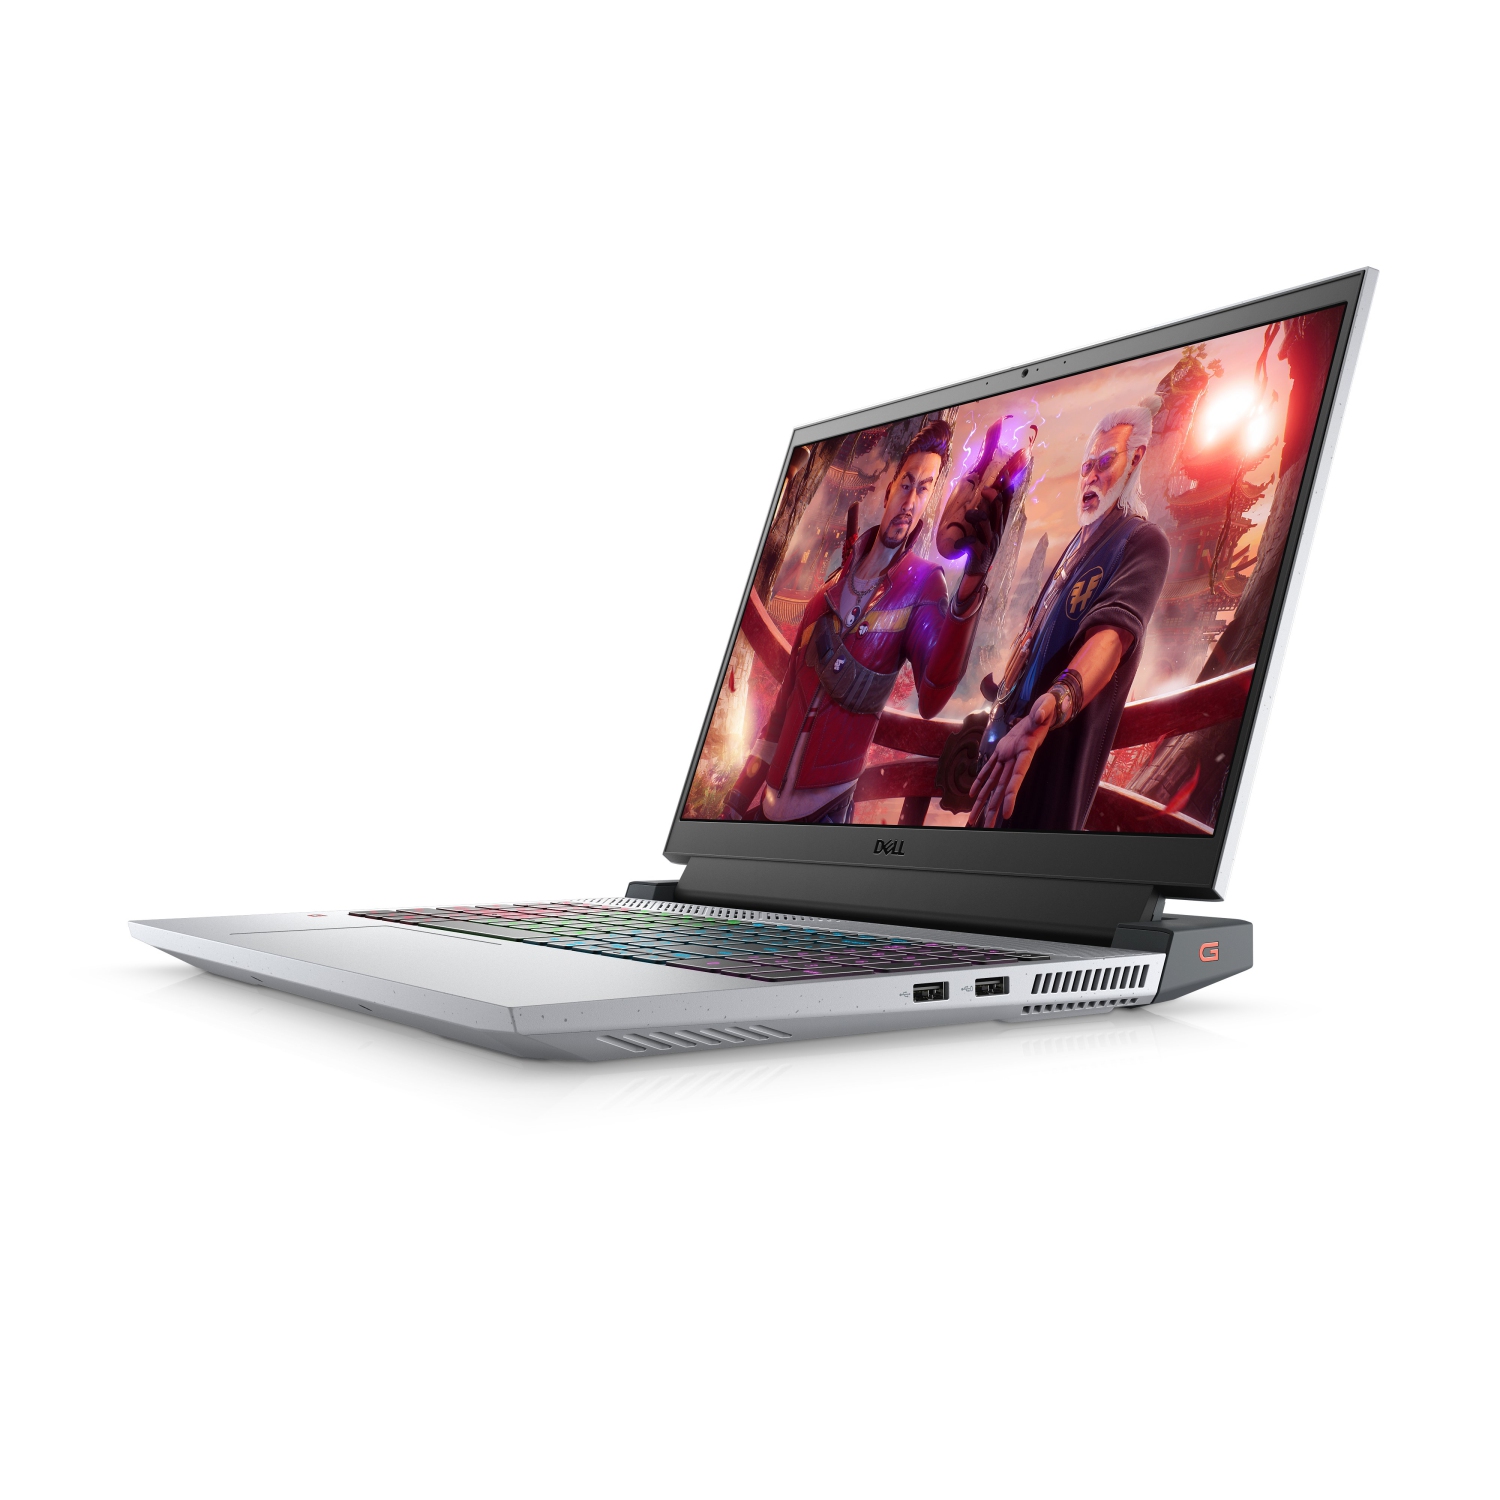 Refurbished (Excellent) - Dell G15 5515 Gaming Laptop (2021) | 15.6" FHD | Core Ryzen 7 - 512GB SSD - 16GB RAM - 3050 Ti | 8 Cores @ 4.4 GHz Certified Refurbished